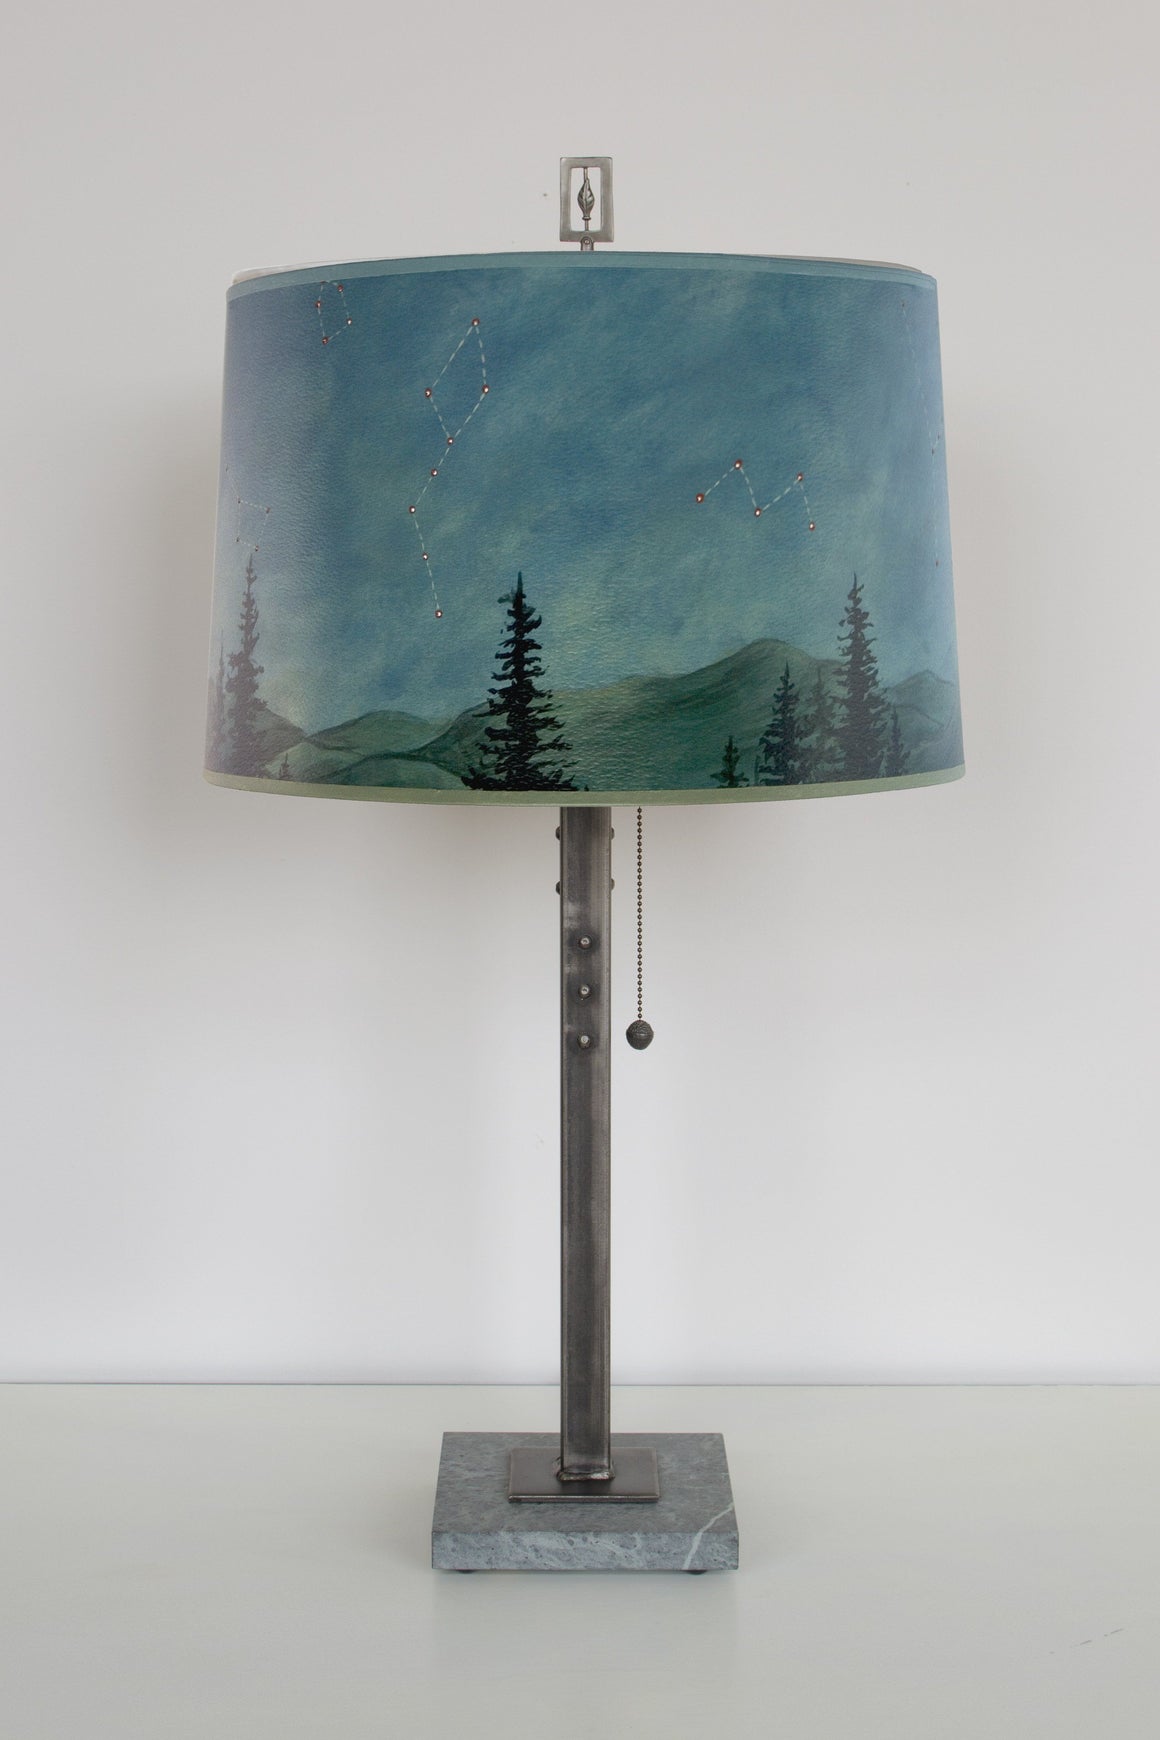 Steel Table Lamp with Large Drum Shade in Midnight Sky